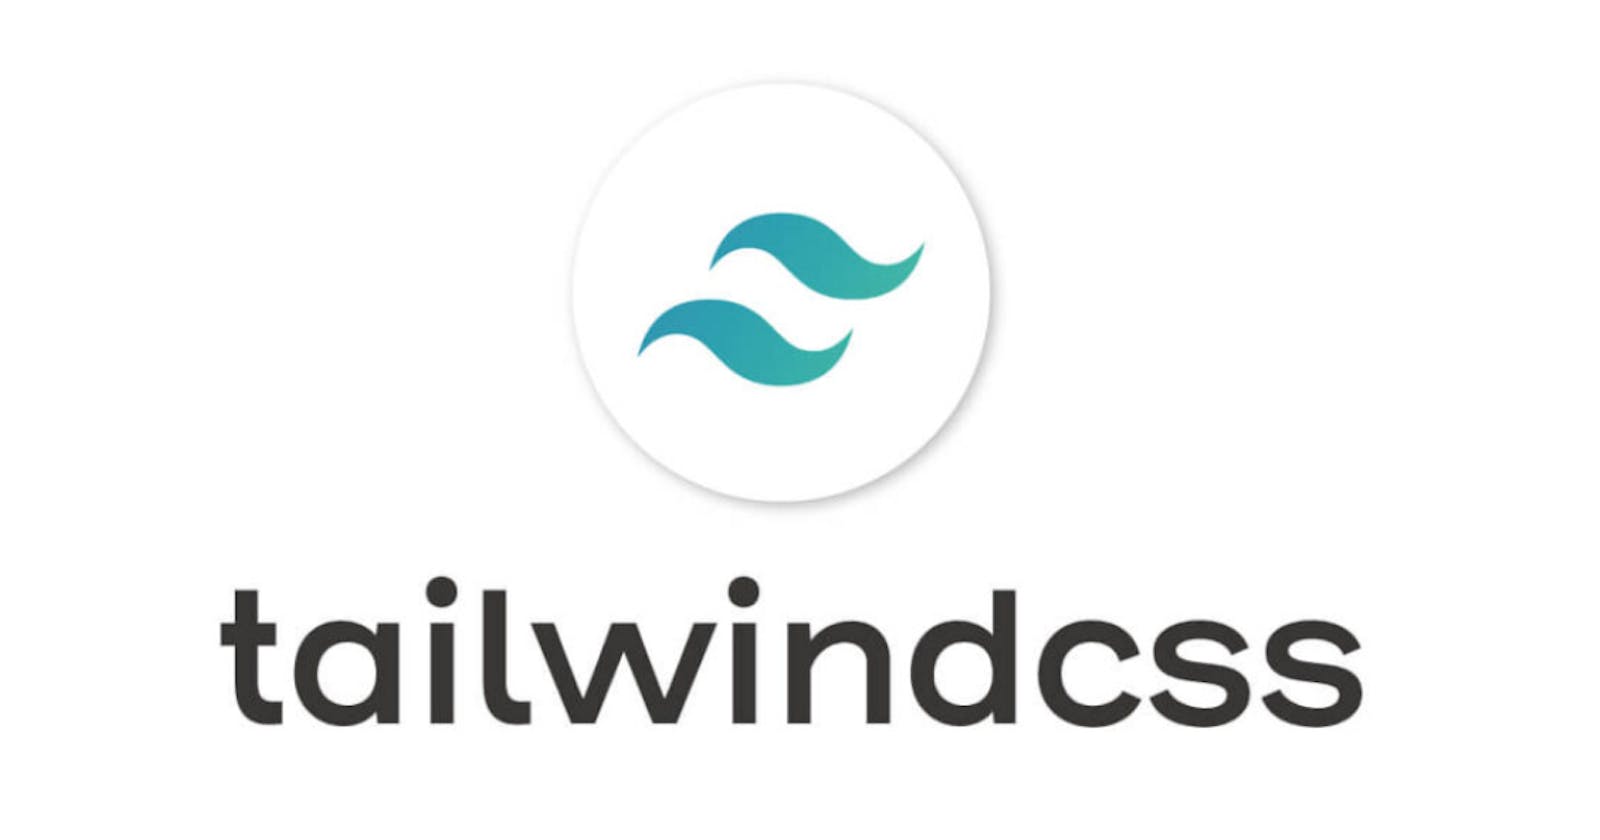 Getting started with tailwind css